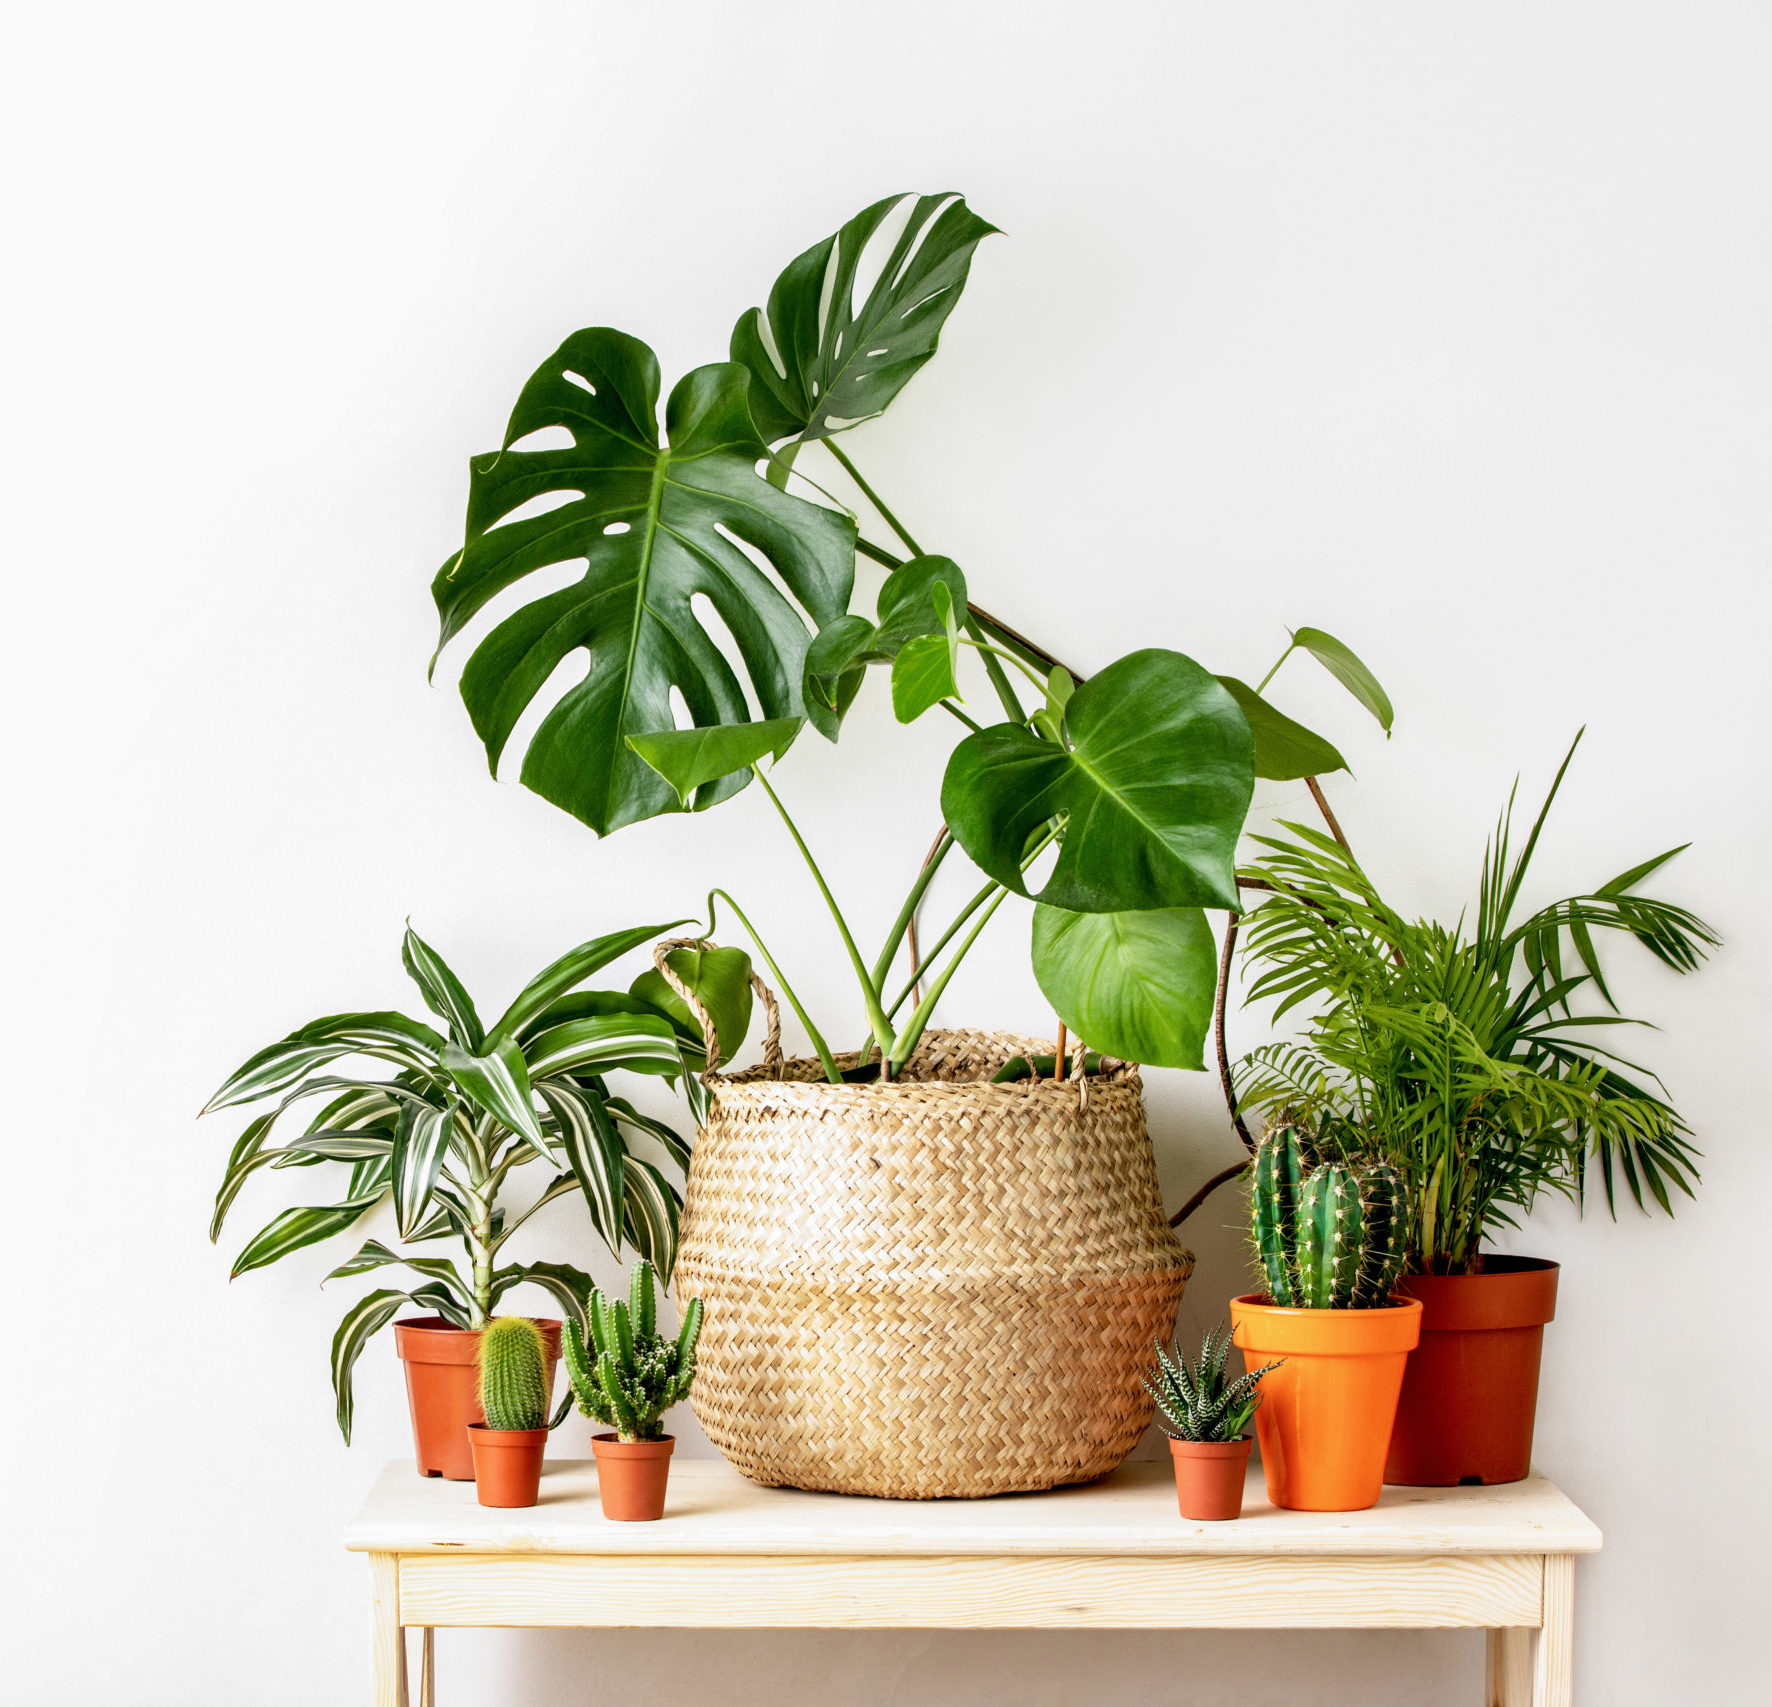 You are currently viewing 10 Plants to Keep your Home Fresh